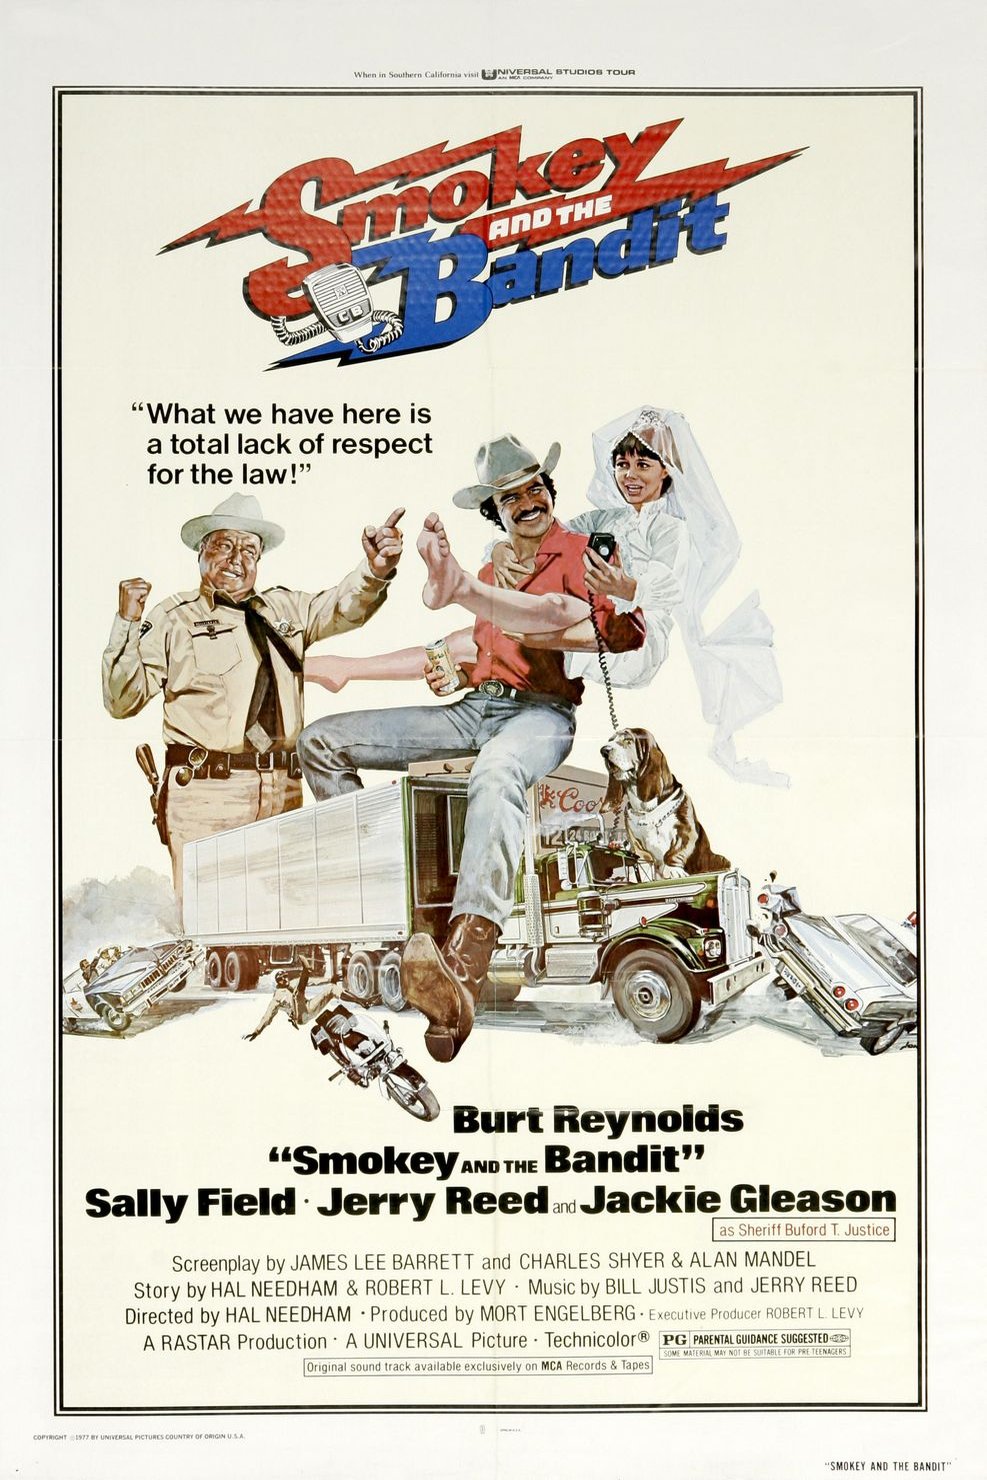 Poster of the movie Smokey and the Bandit